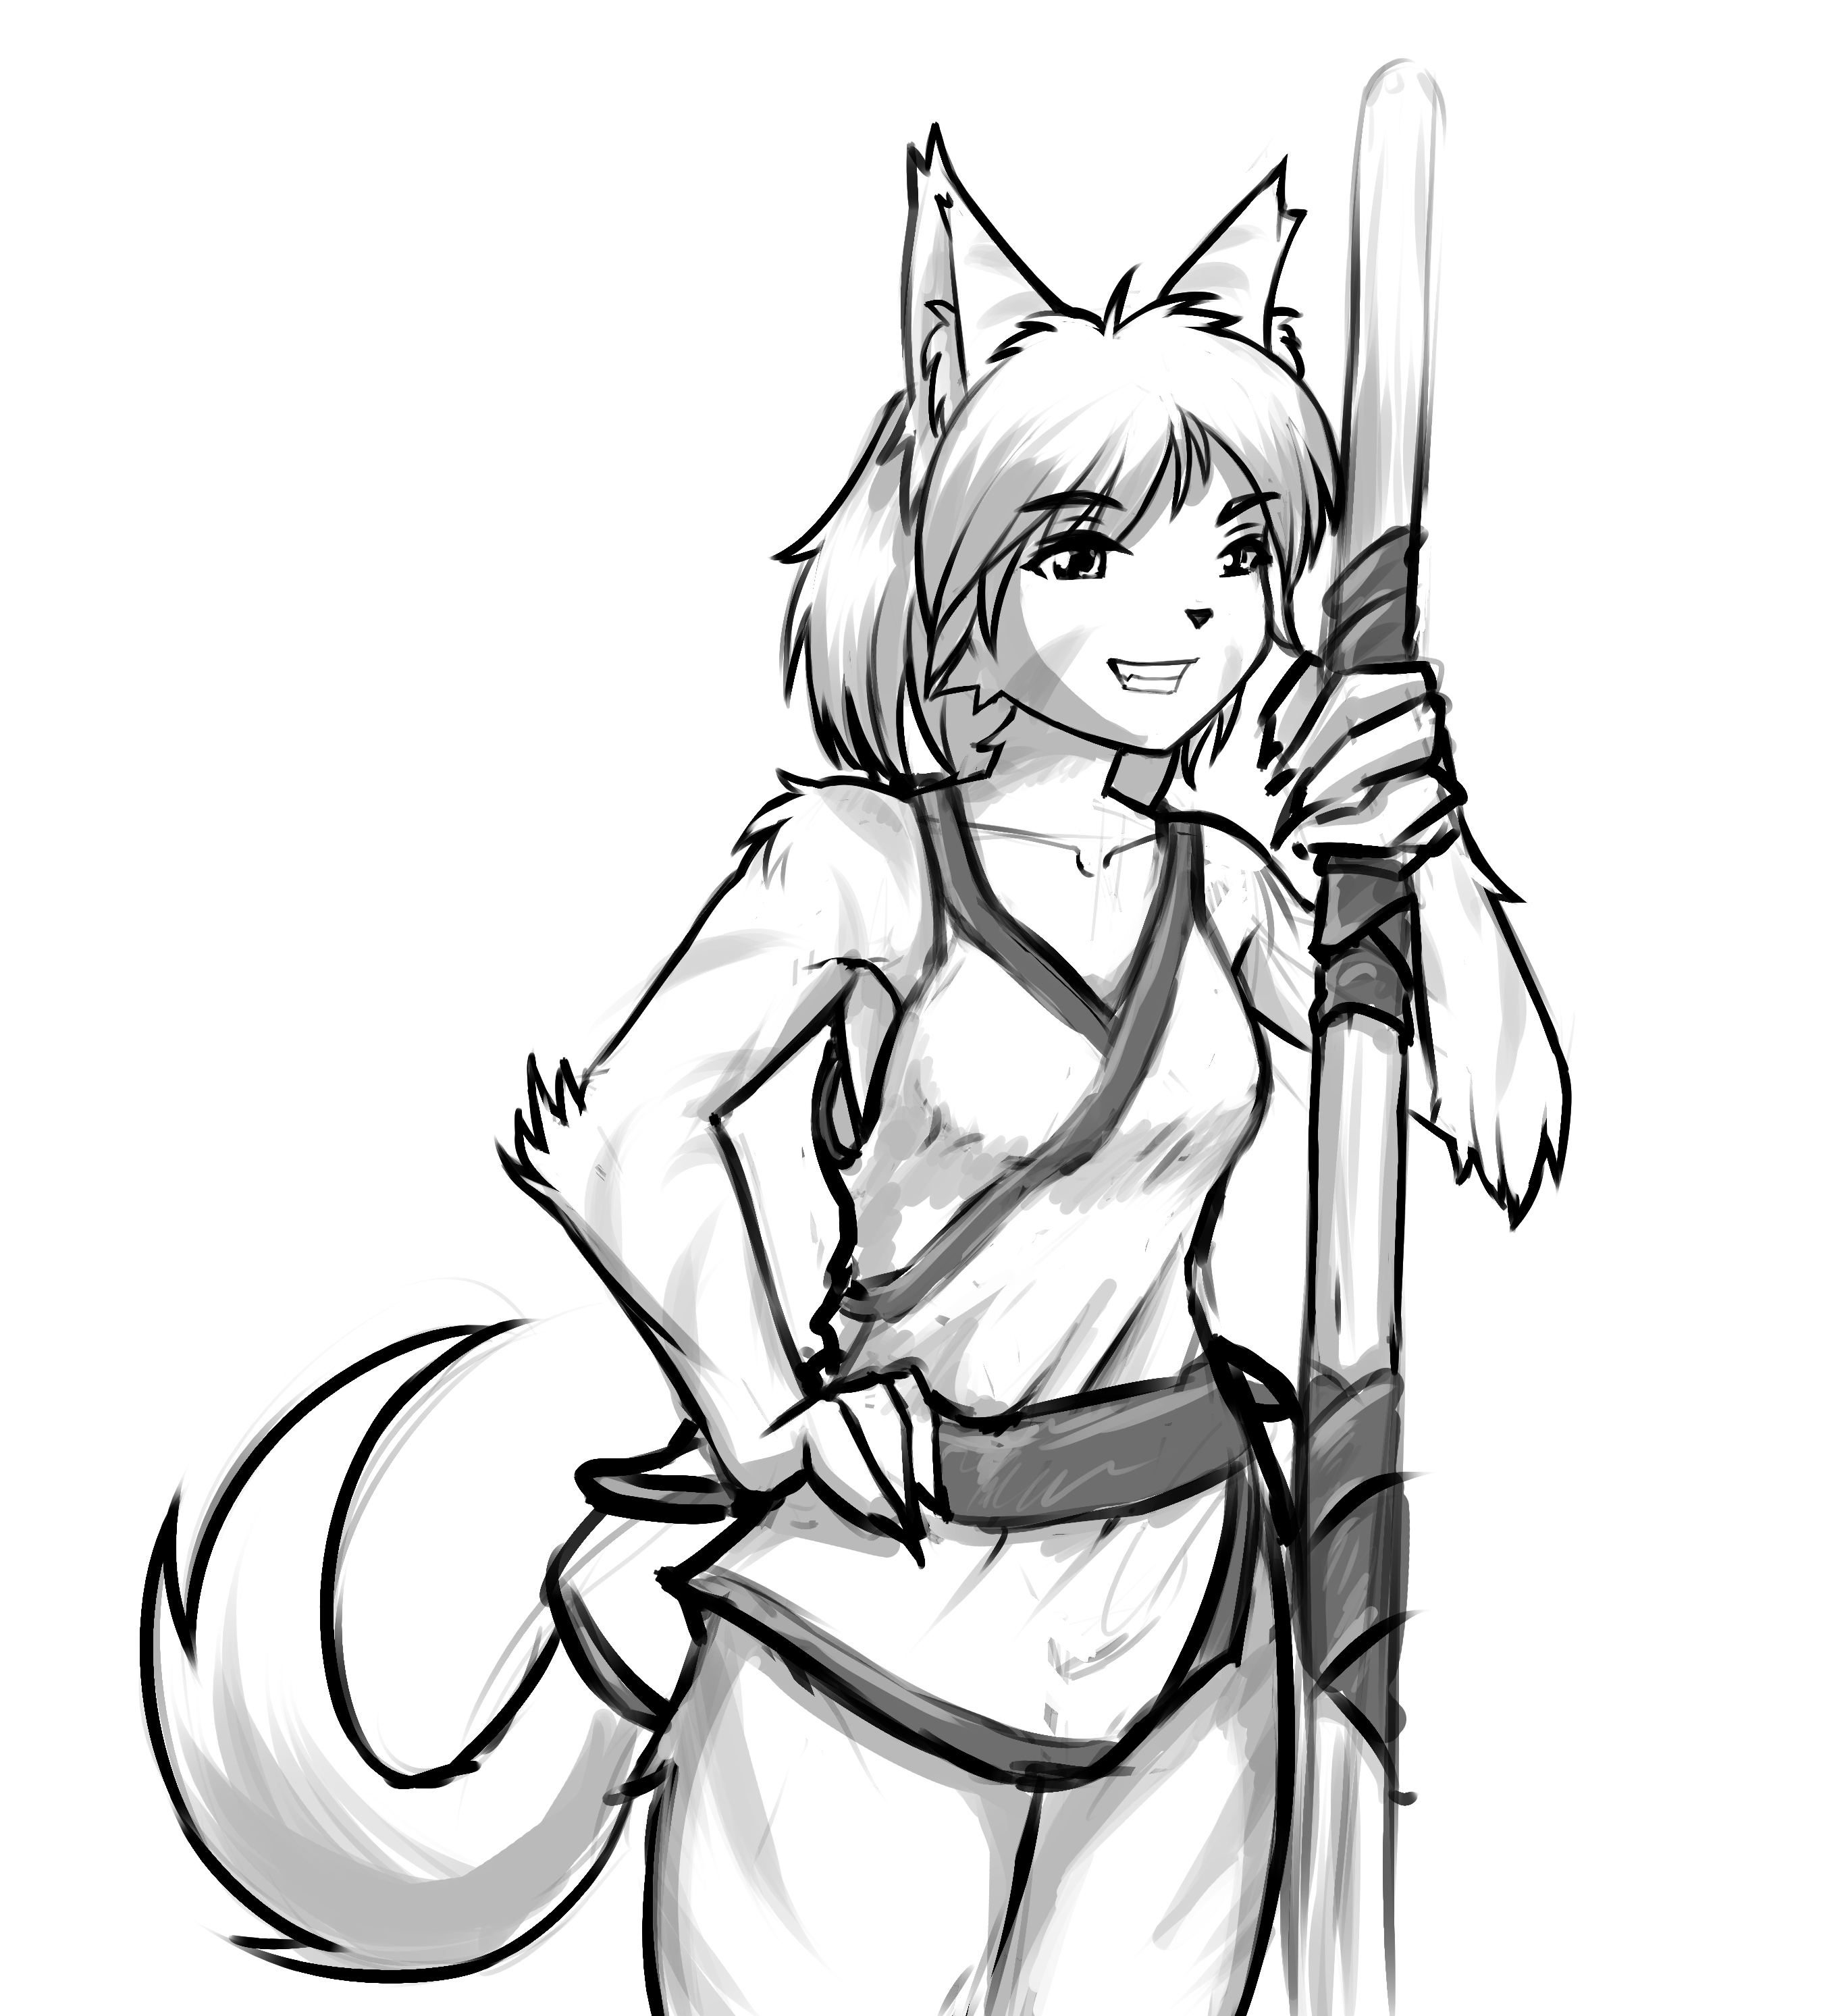 Lana_the_Tabaxi_Monk.png